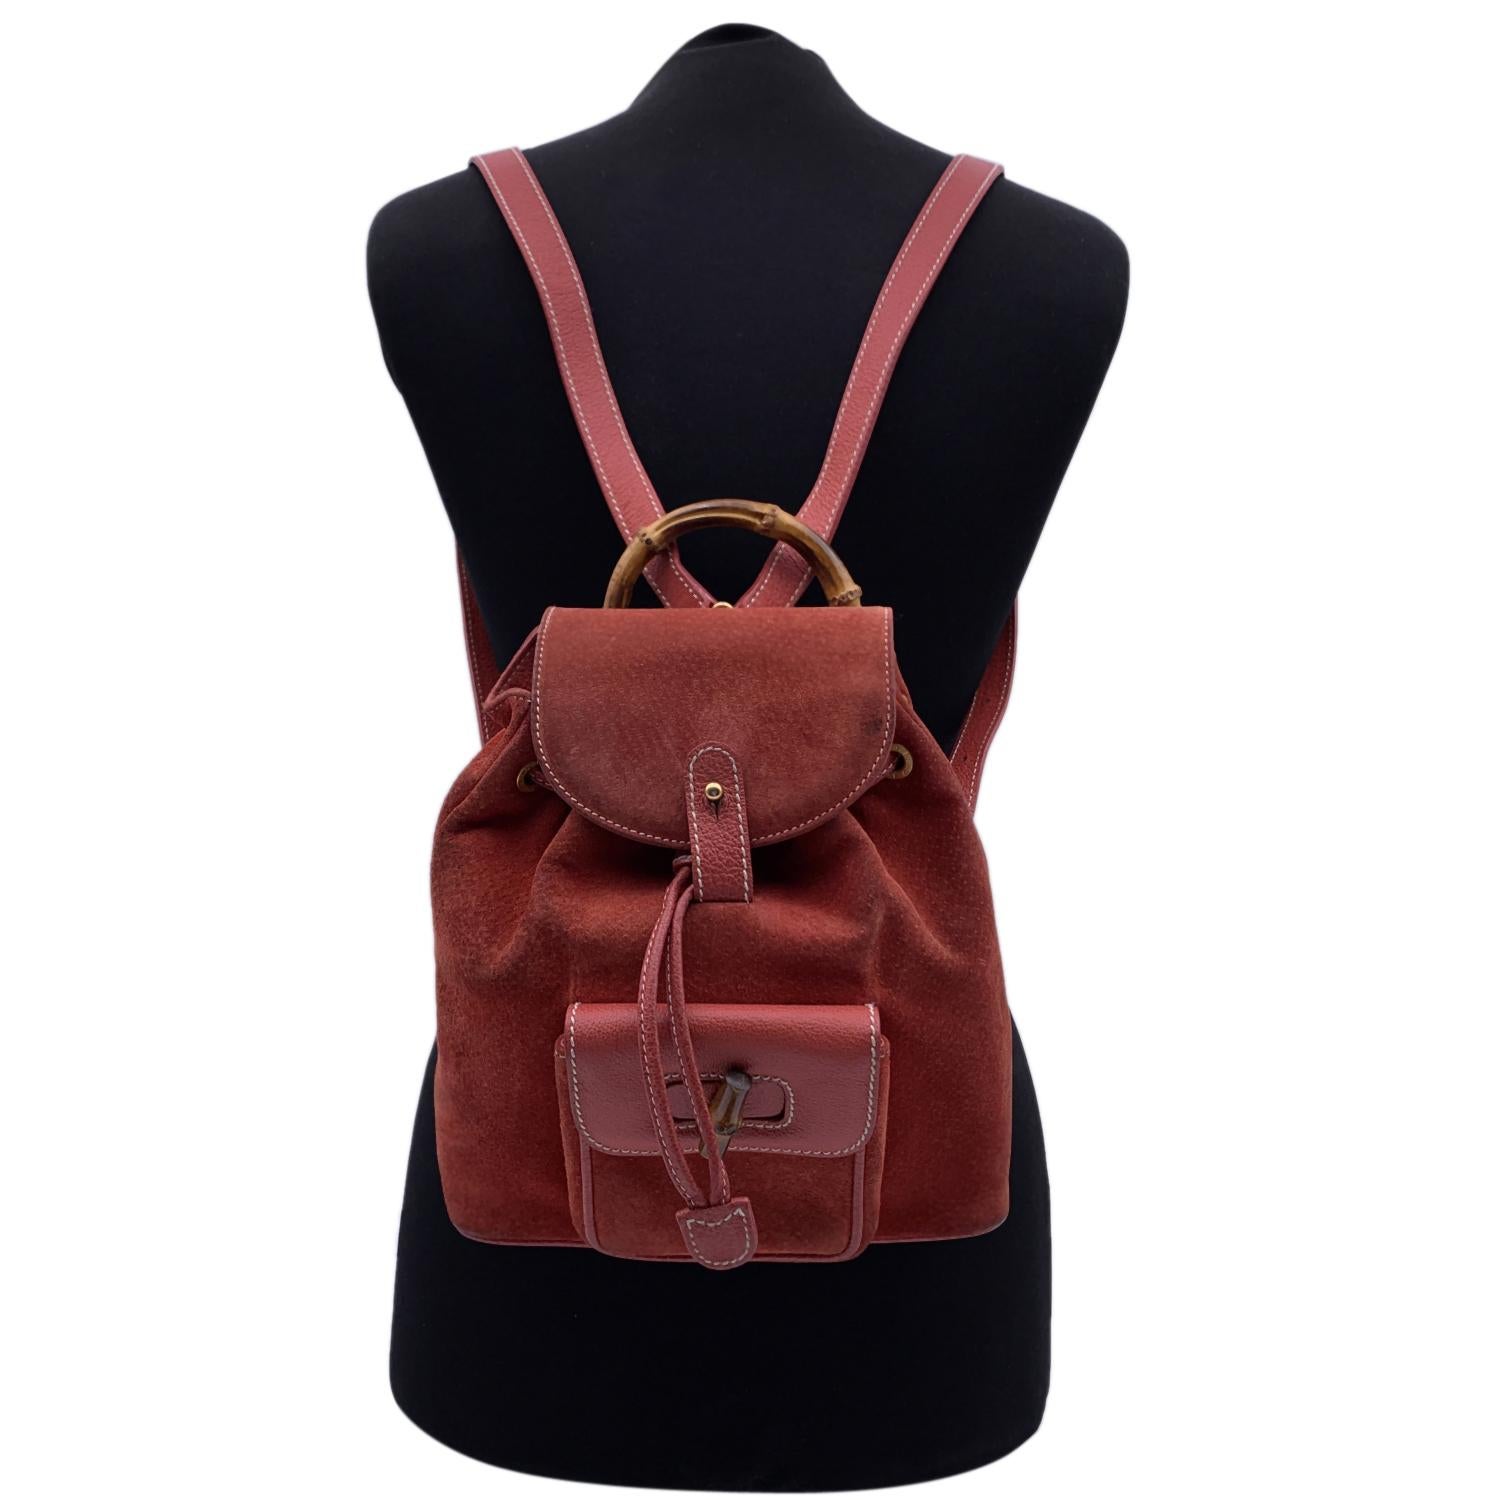 Vintage small backpack by Gucci, crafted in red suede and leather. It features Bamboo handle and and knob. 1 front pocket with twist lock closure. Flap closure and drawstring top opening. gold metal hardware. Internal beige diamond lining. 1 side